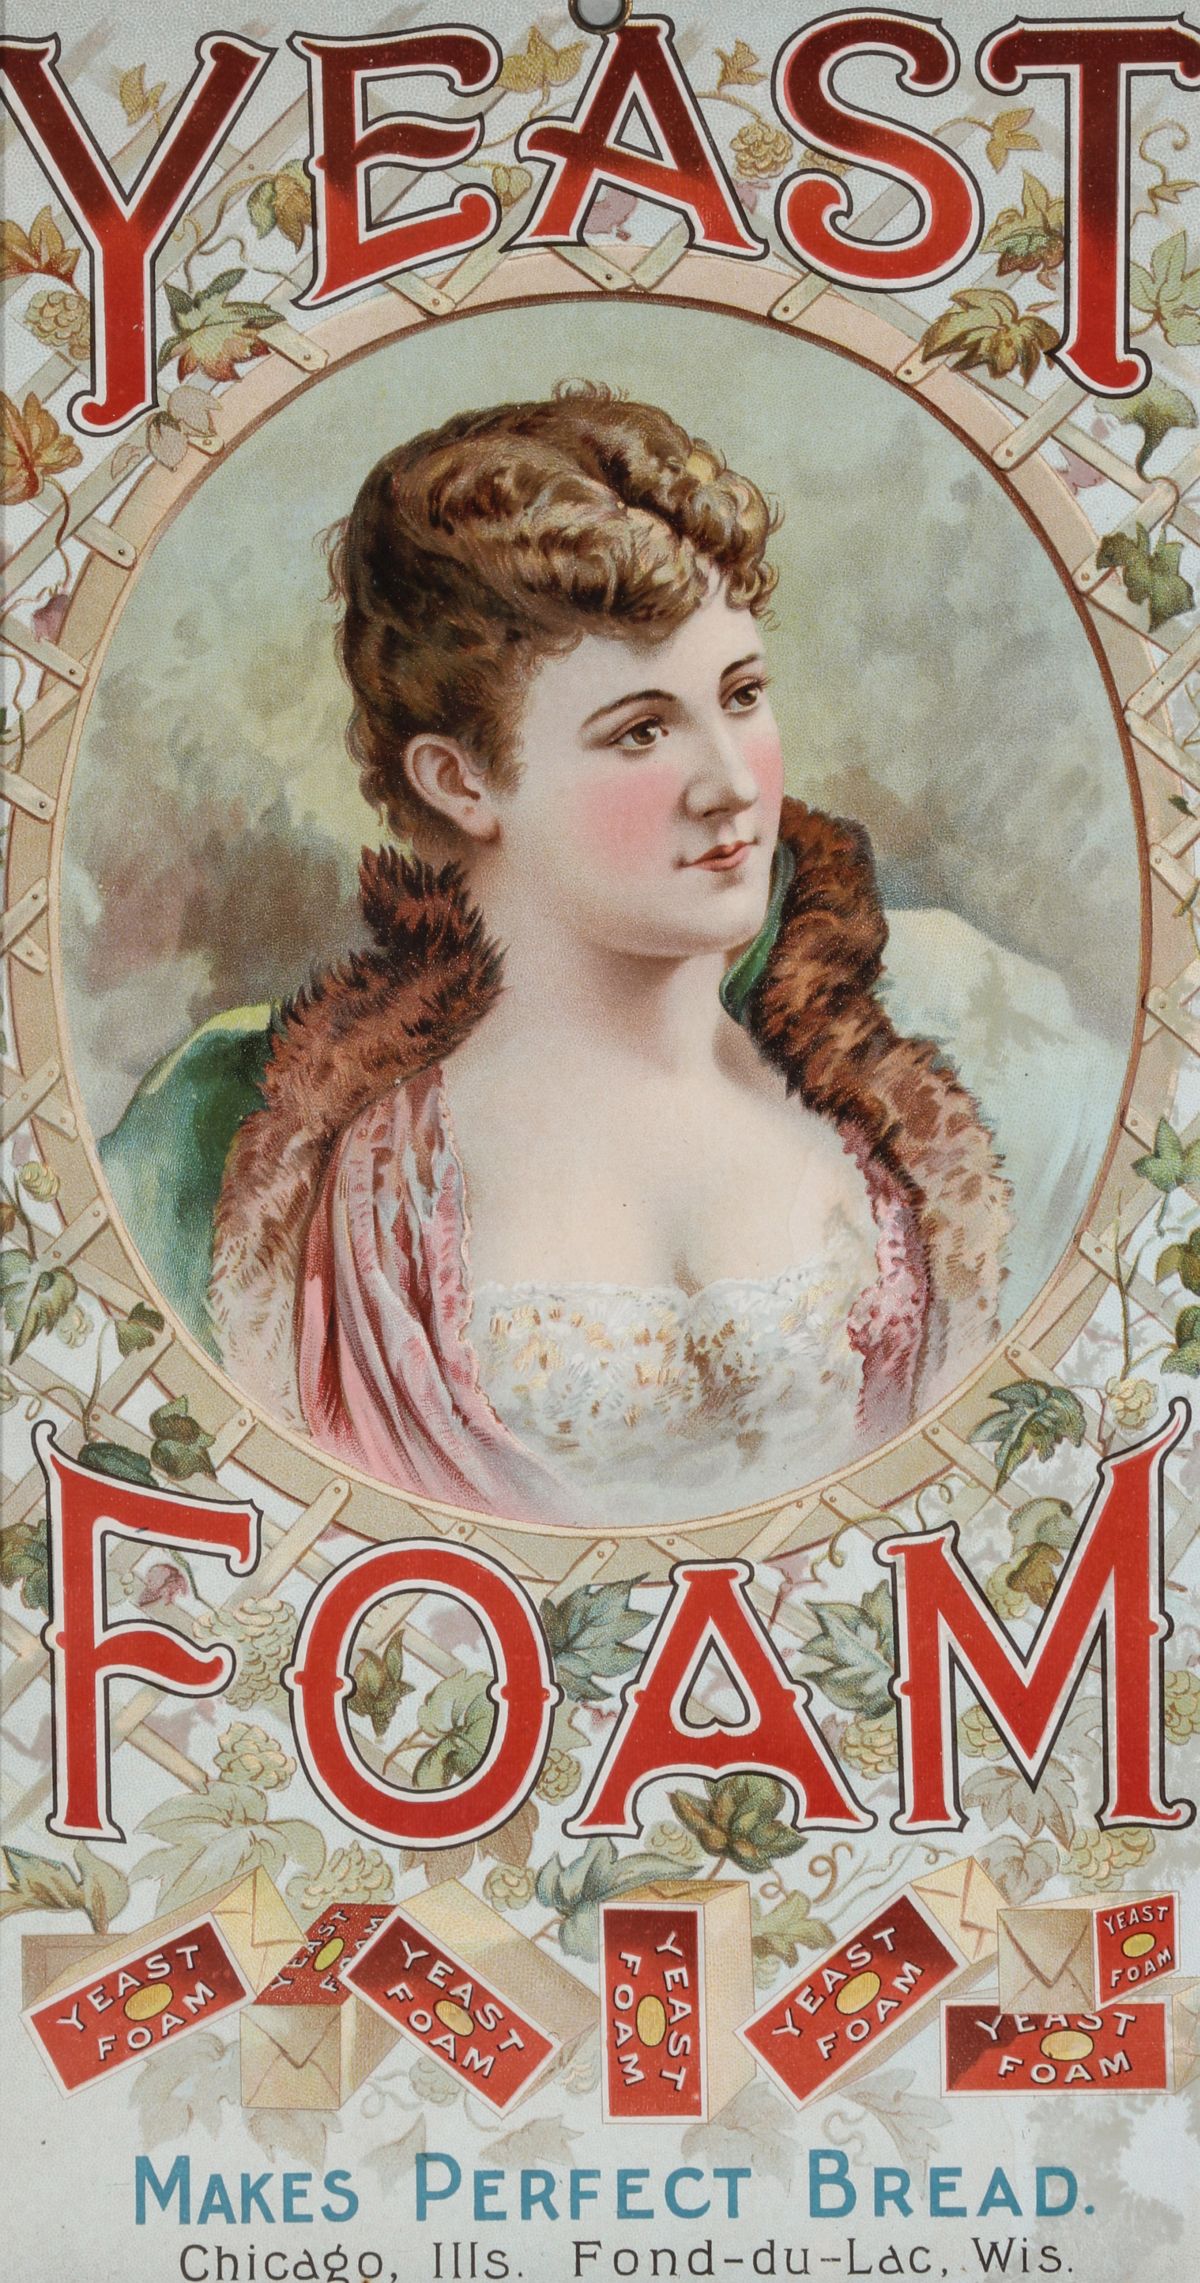 A YEAST FOAM BRAND ADVERTISING POSTER C. 1900